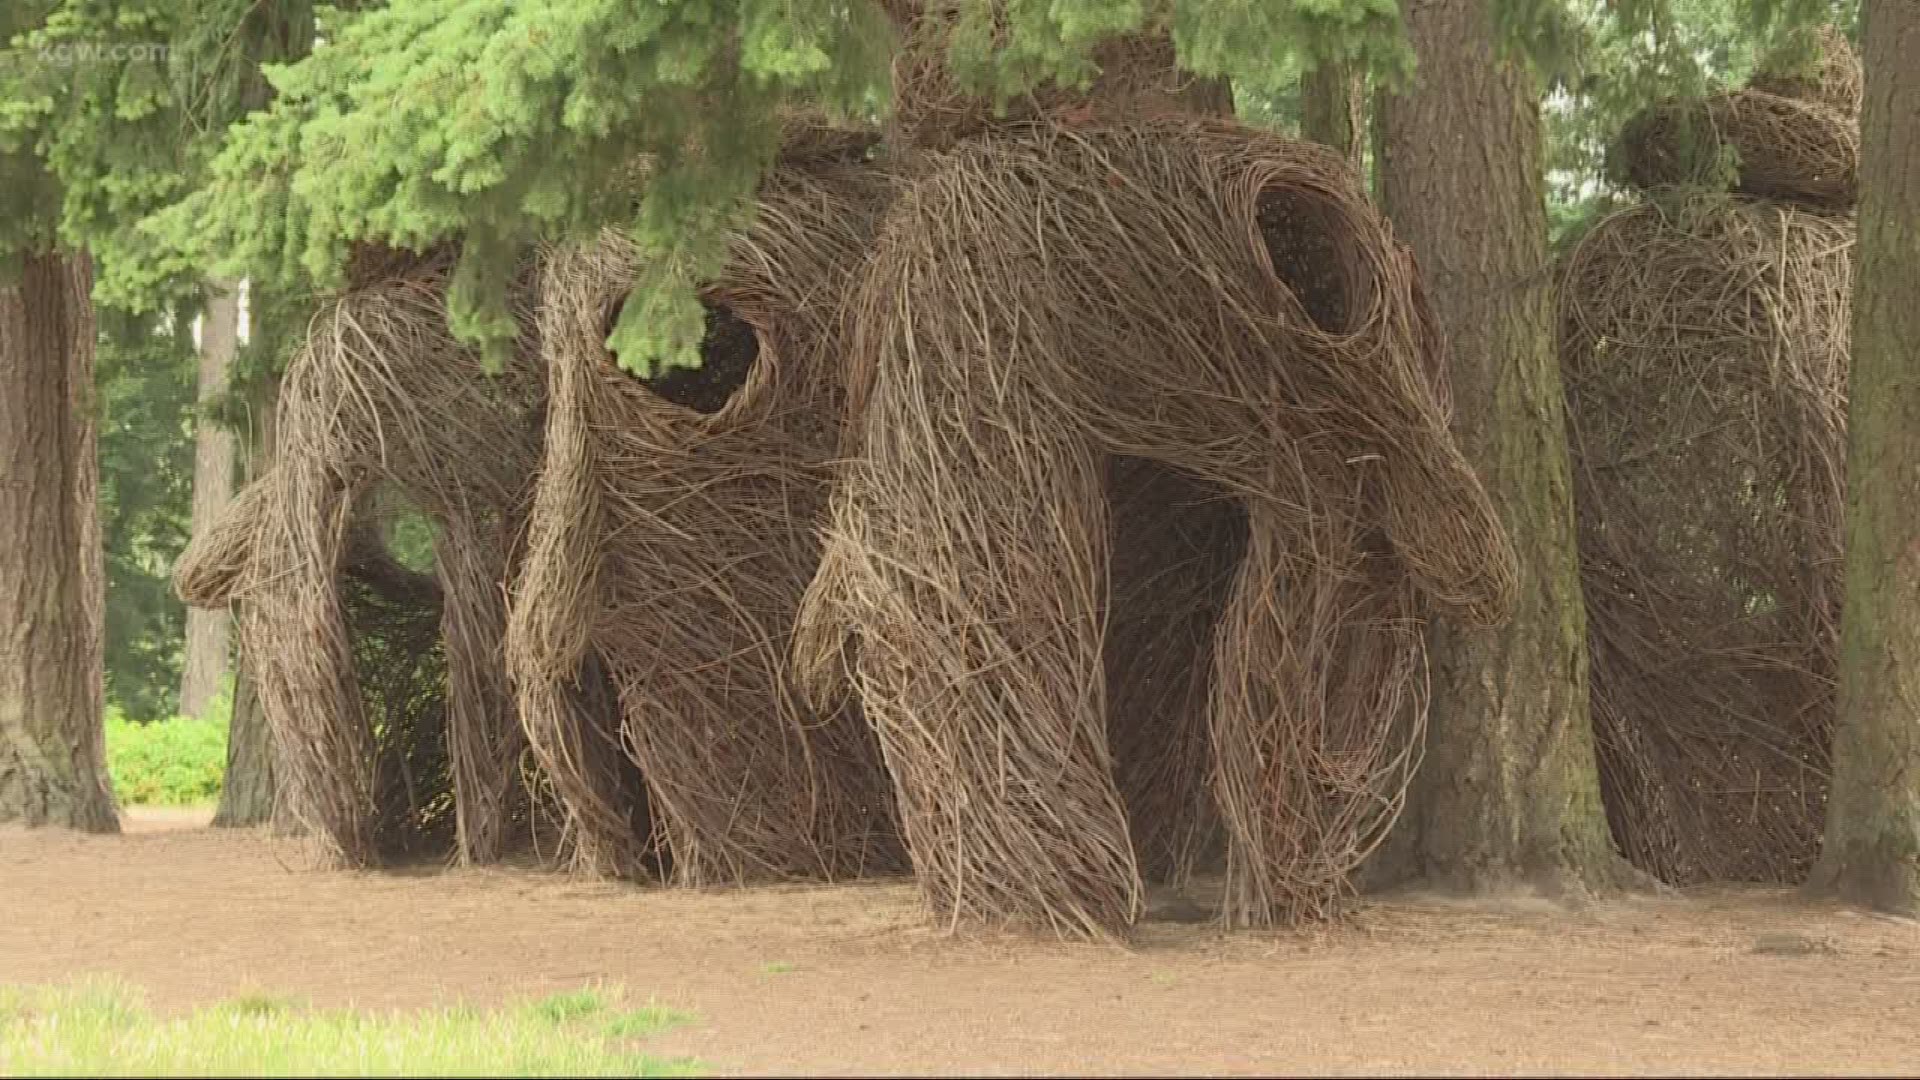 Check out the Patrick Doughtery woven stick sculpture in Orenco Woods Nature Park called 'Head Over Heels.' The faces are inspired by masks from Pacific Northwest tribes.p